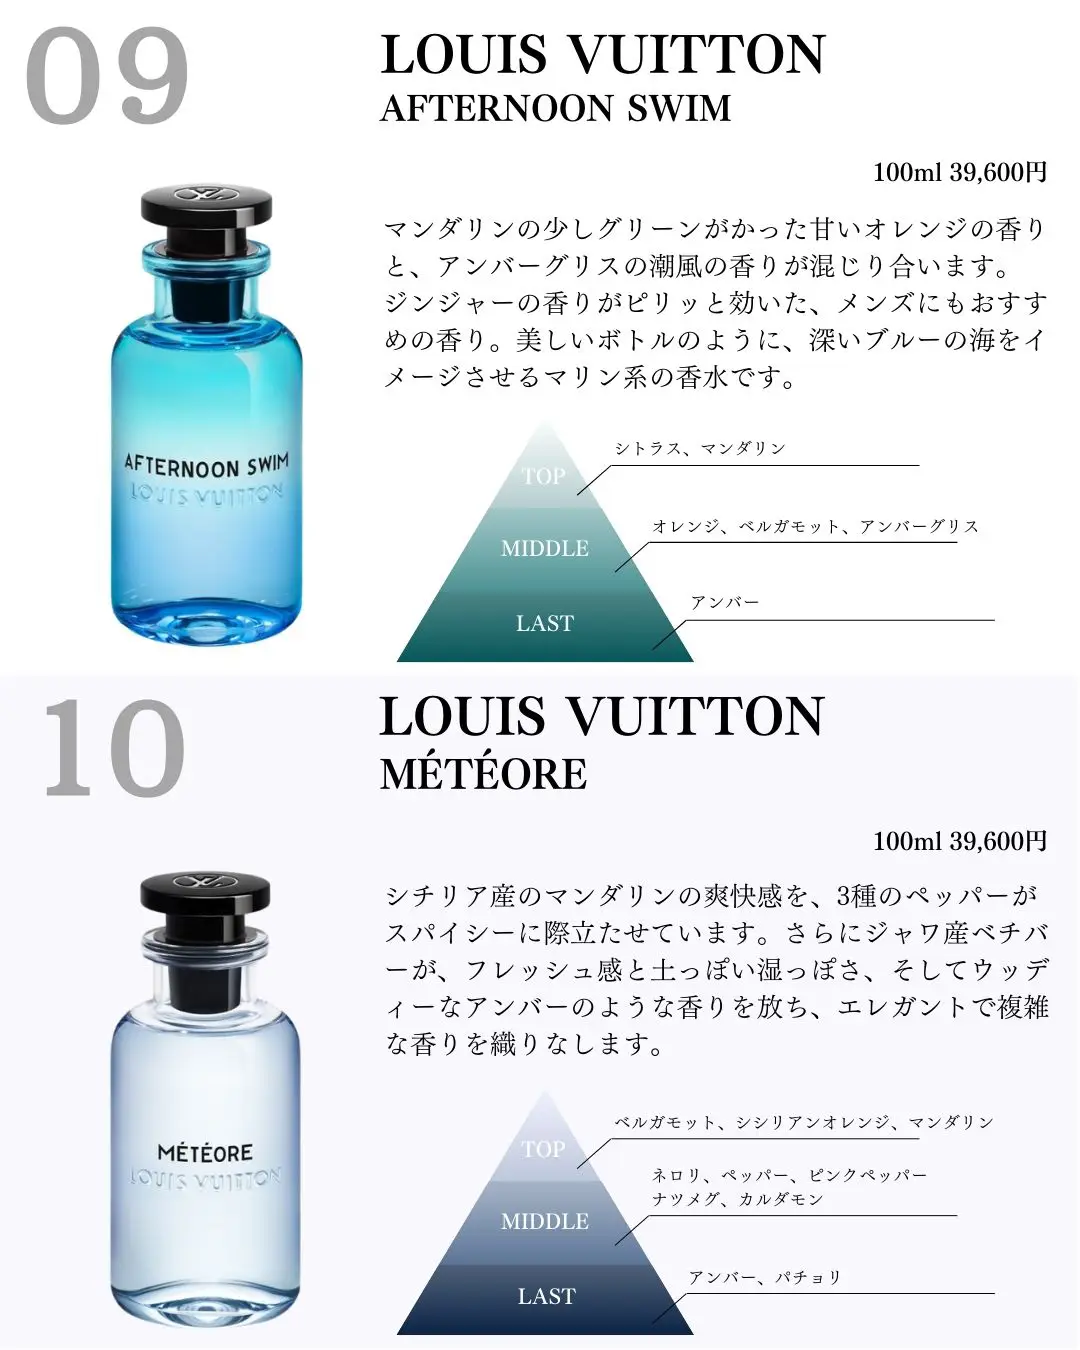 louis vuittons afternoon swim 100ml